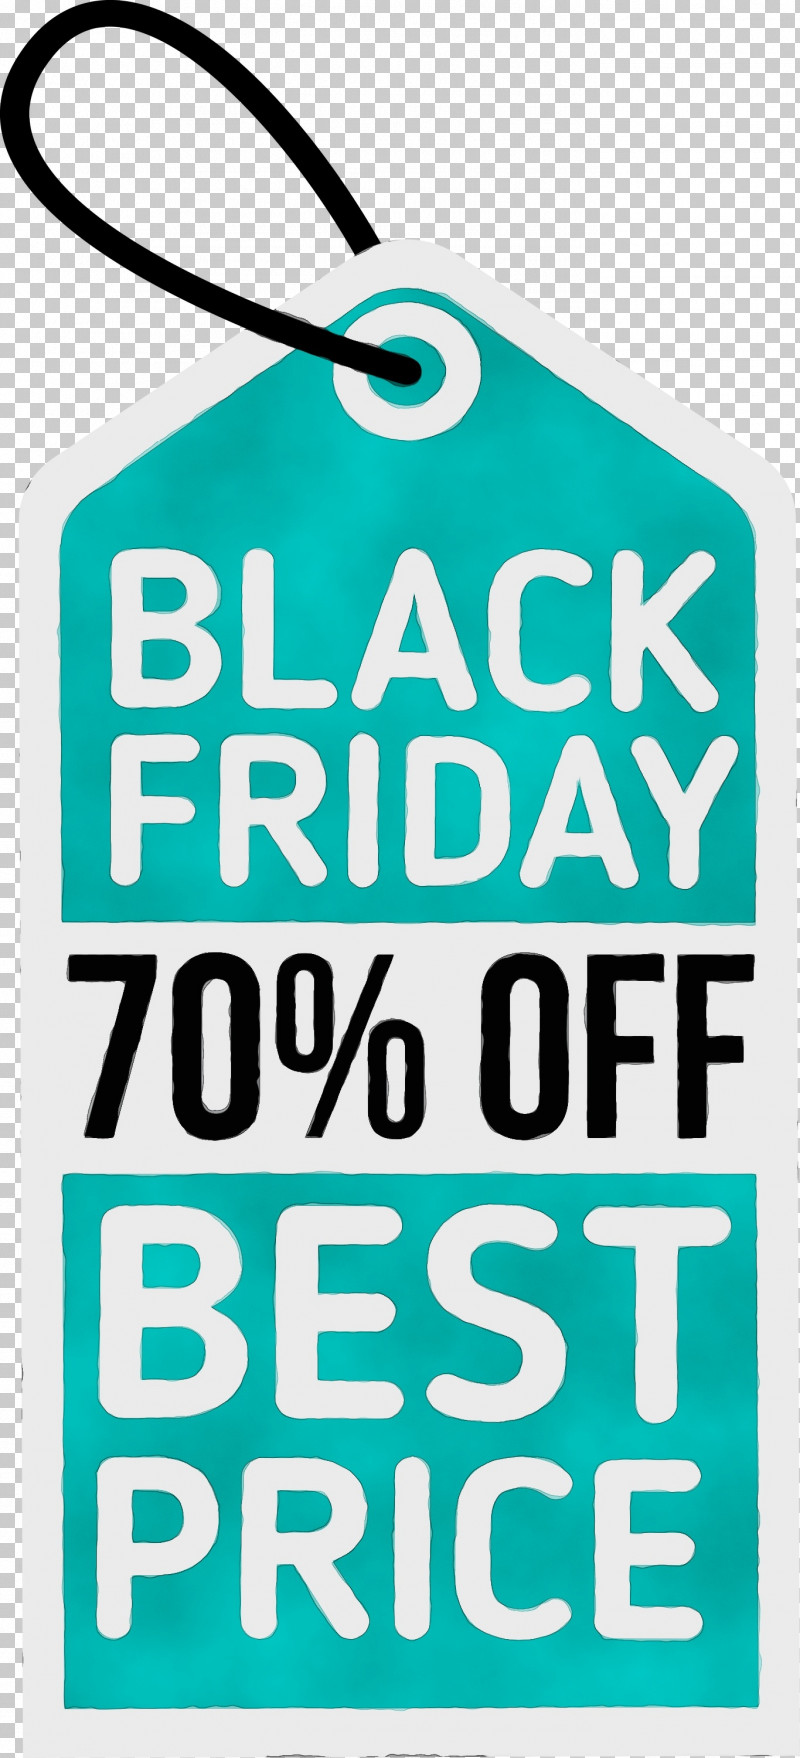 Logo Font Teal Line Area PNG, Clipart, Area, Black Friday, Black Friday Discount, Black Friday Sale, Blafre Free PNG Download